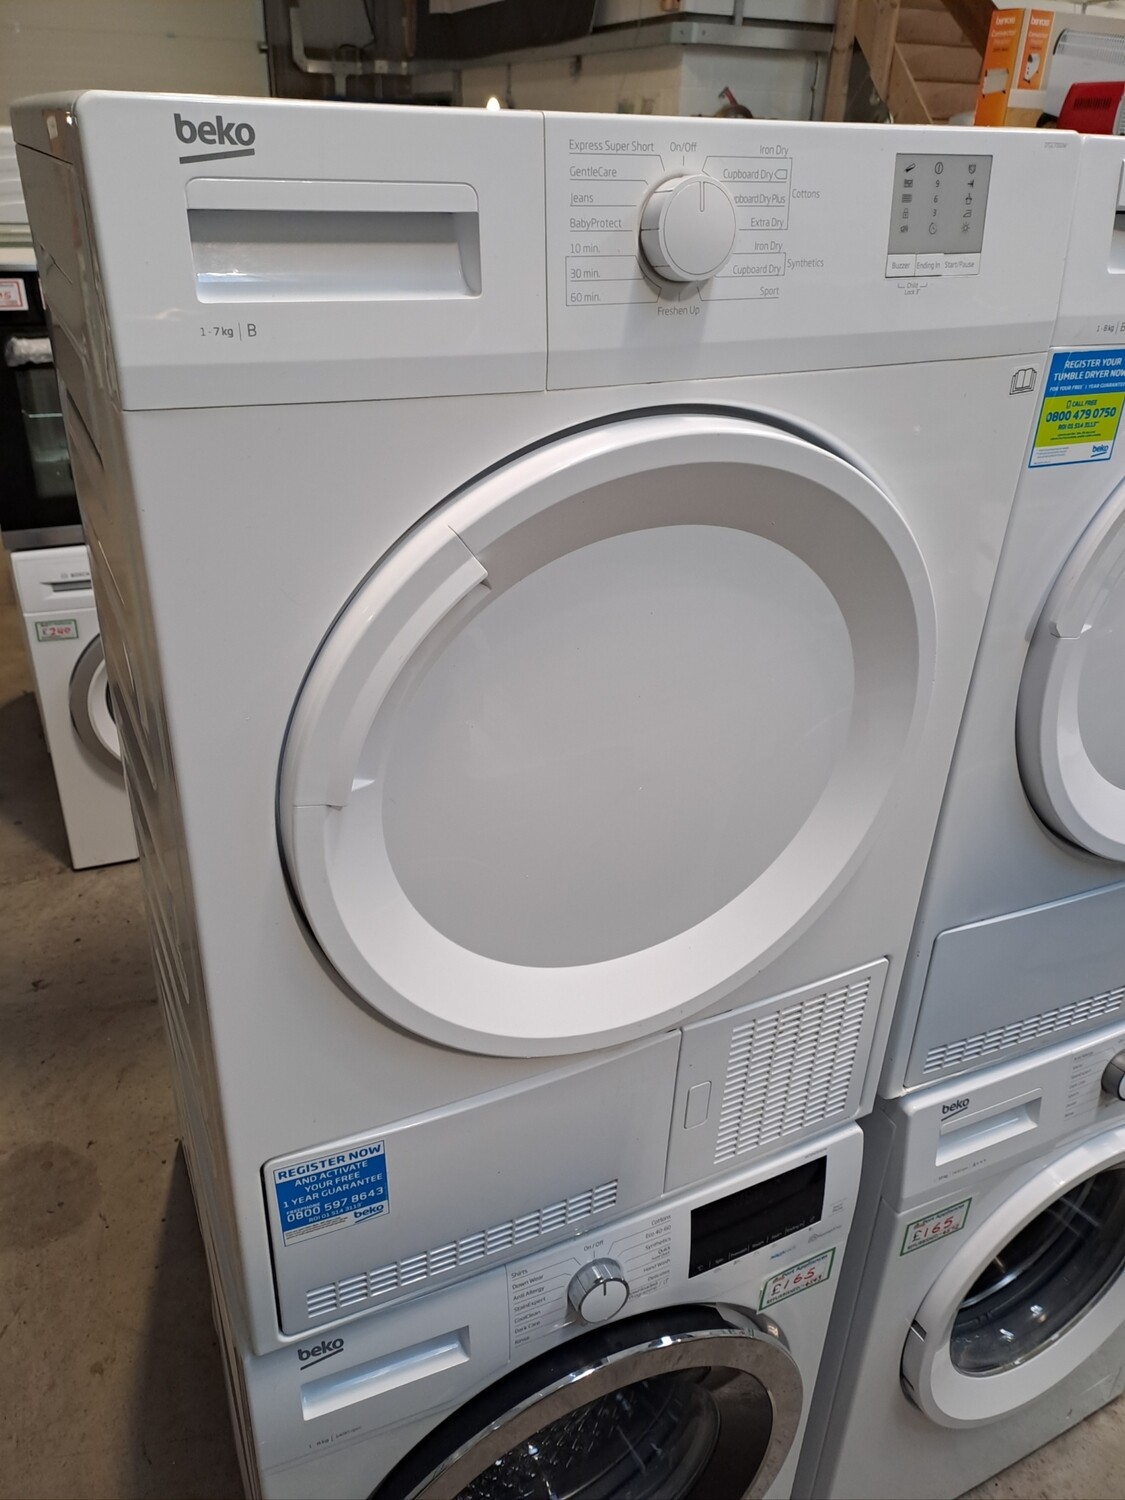 Beko DTGC7001W 7kg Condenser Dryer White Refurbished 6 Months Guarantee. This item is located in our Whitby Road Shop 